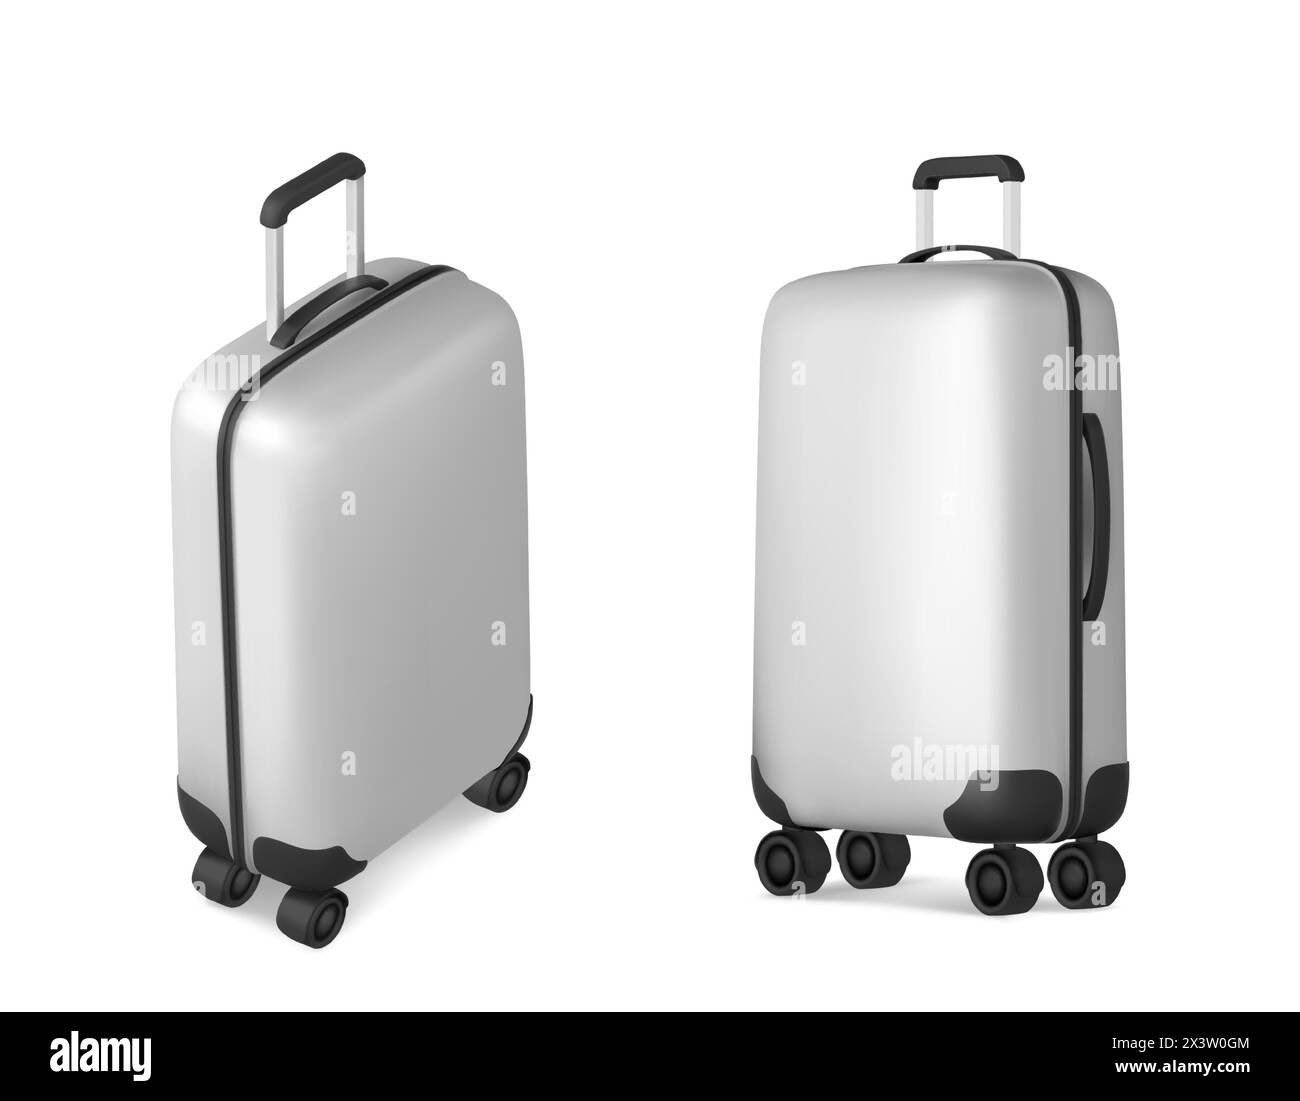 White suitcase with handle and wheels in different angles of view. Realistic 3d vector illustration set of travel luggage bag. Plastic baggage for trip and vacation concept. Voyage accessory template. Stock Vector